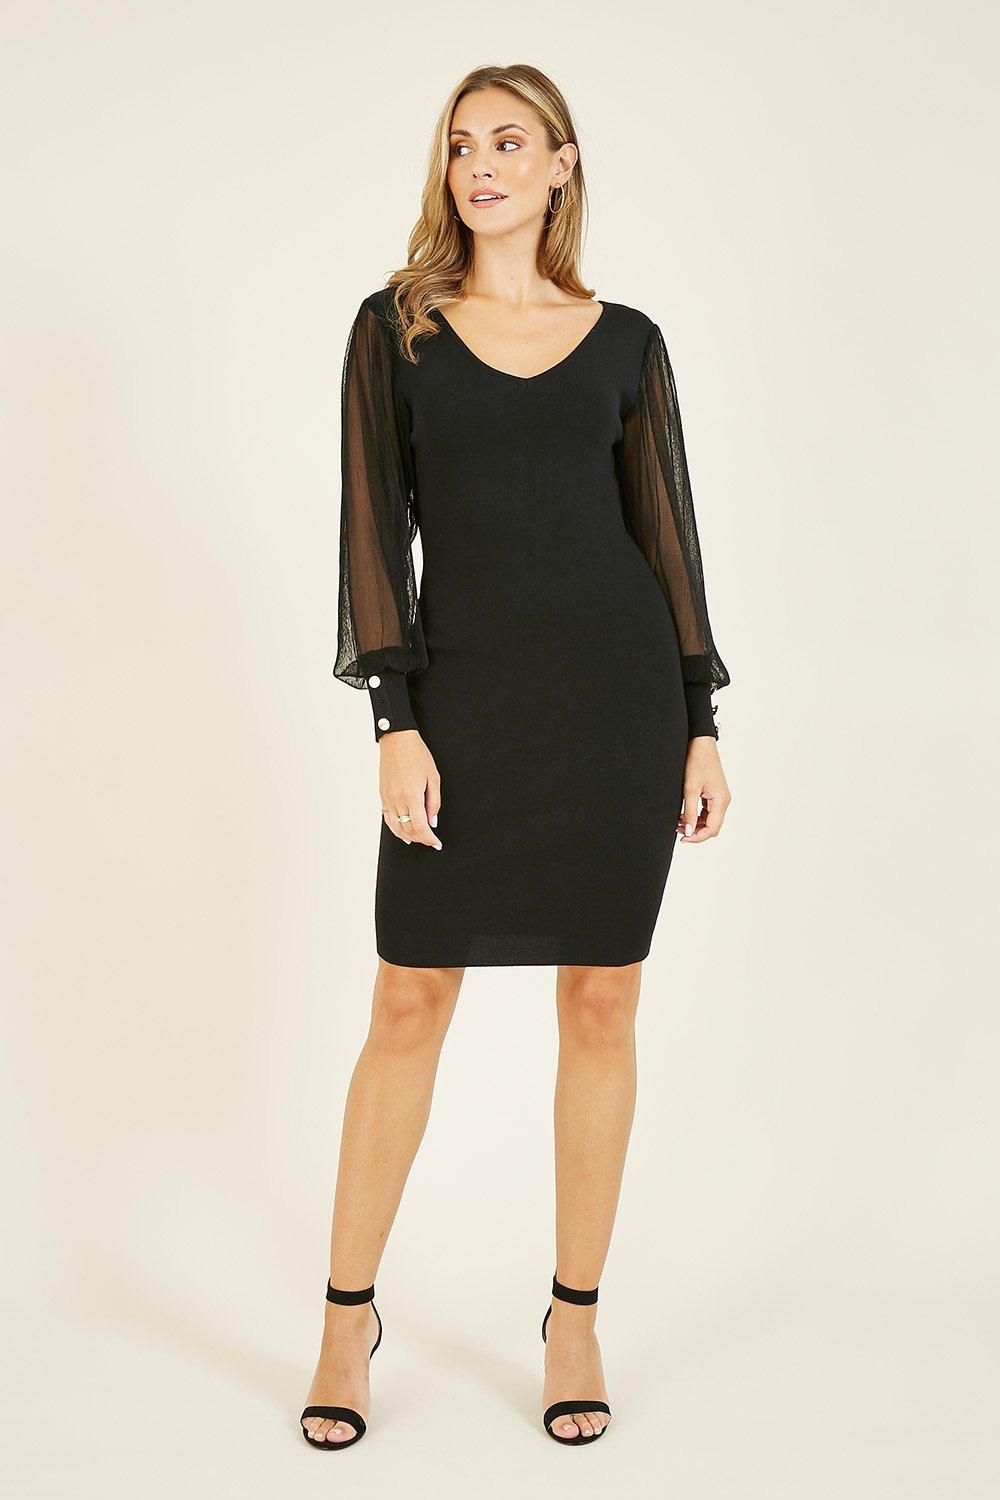 Black Knitted Bodycon Dress With Chiffon Sleeves